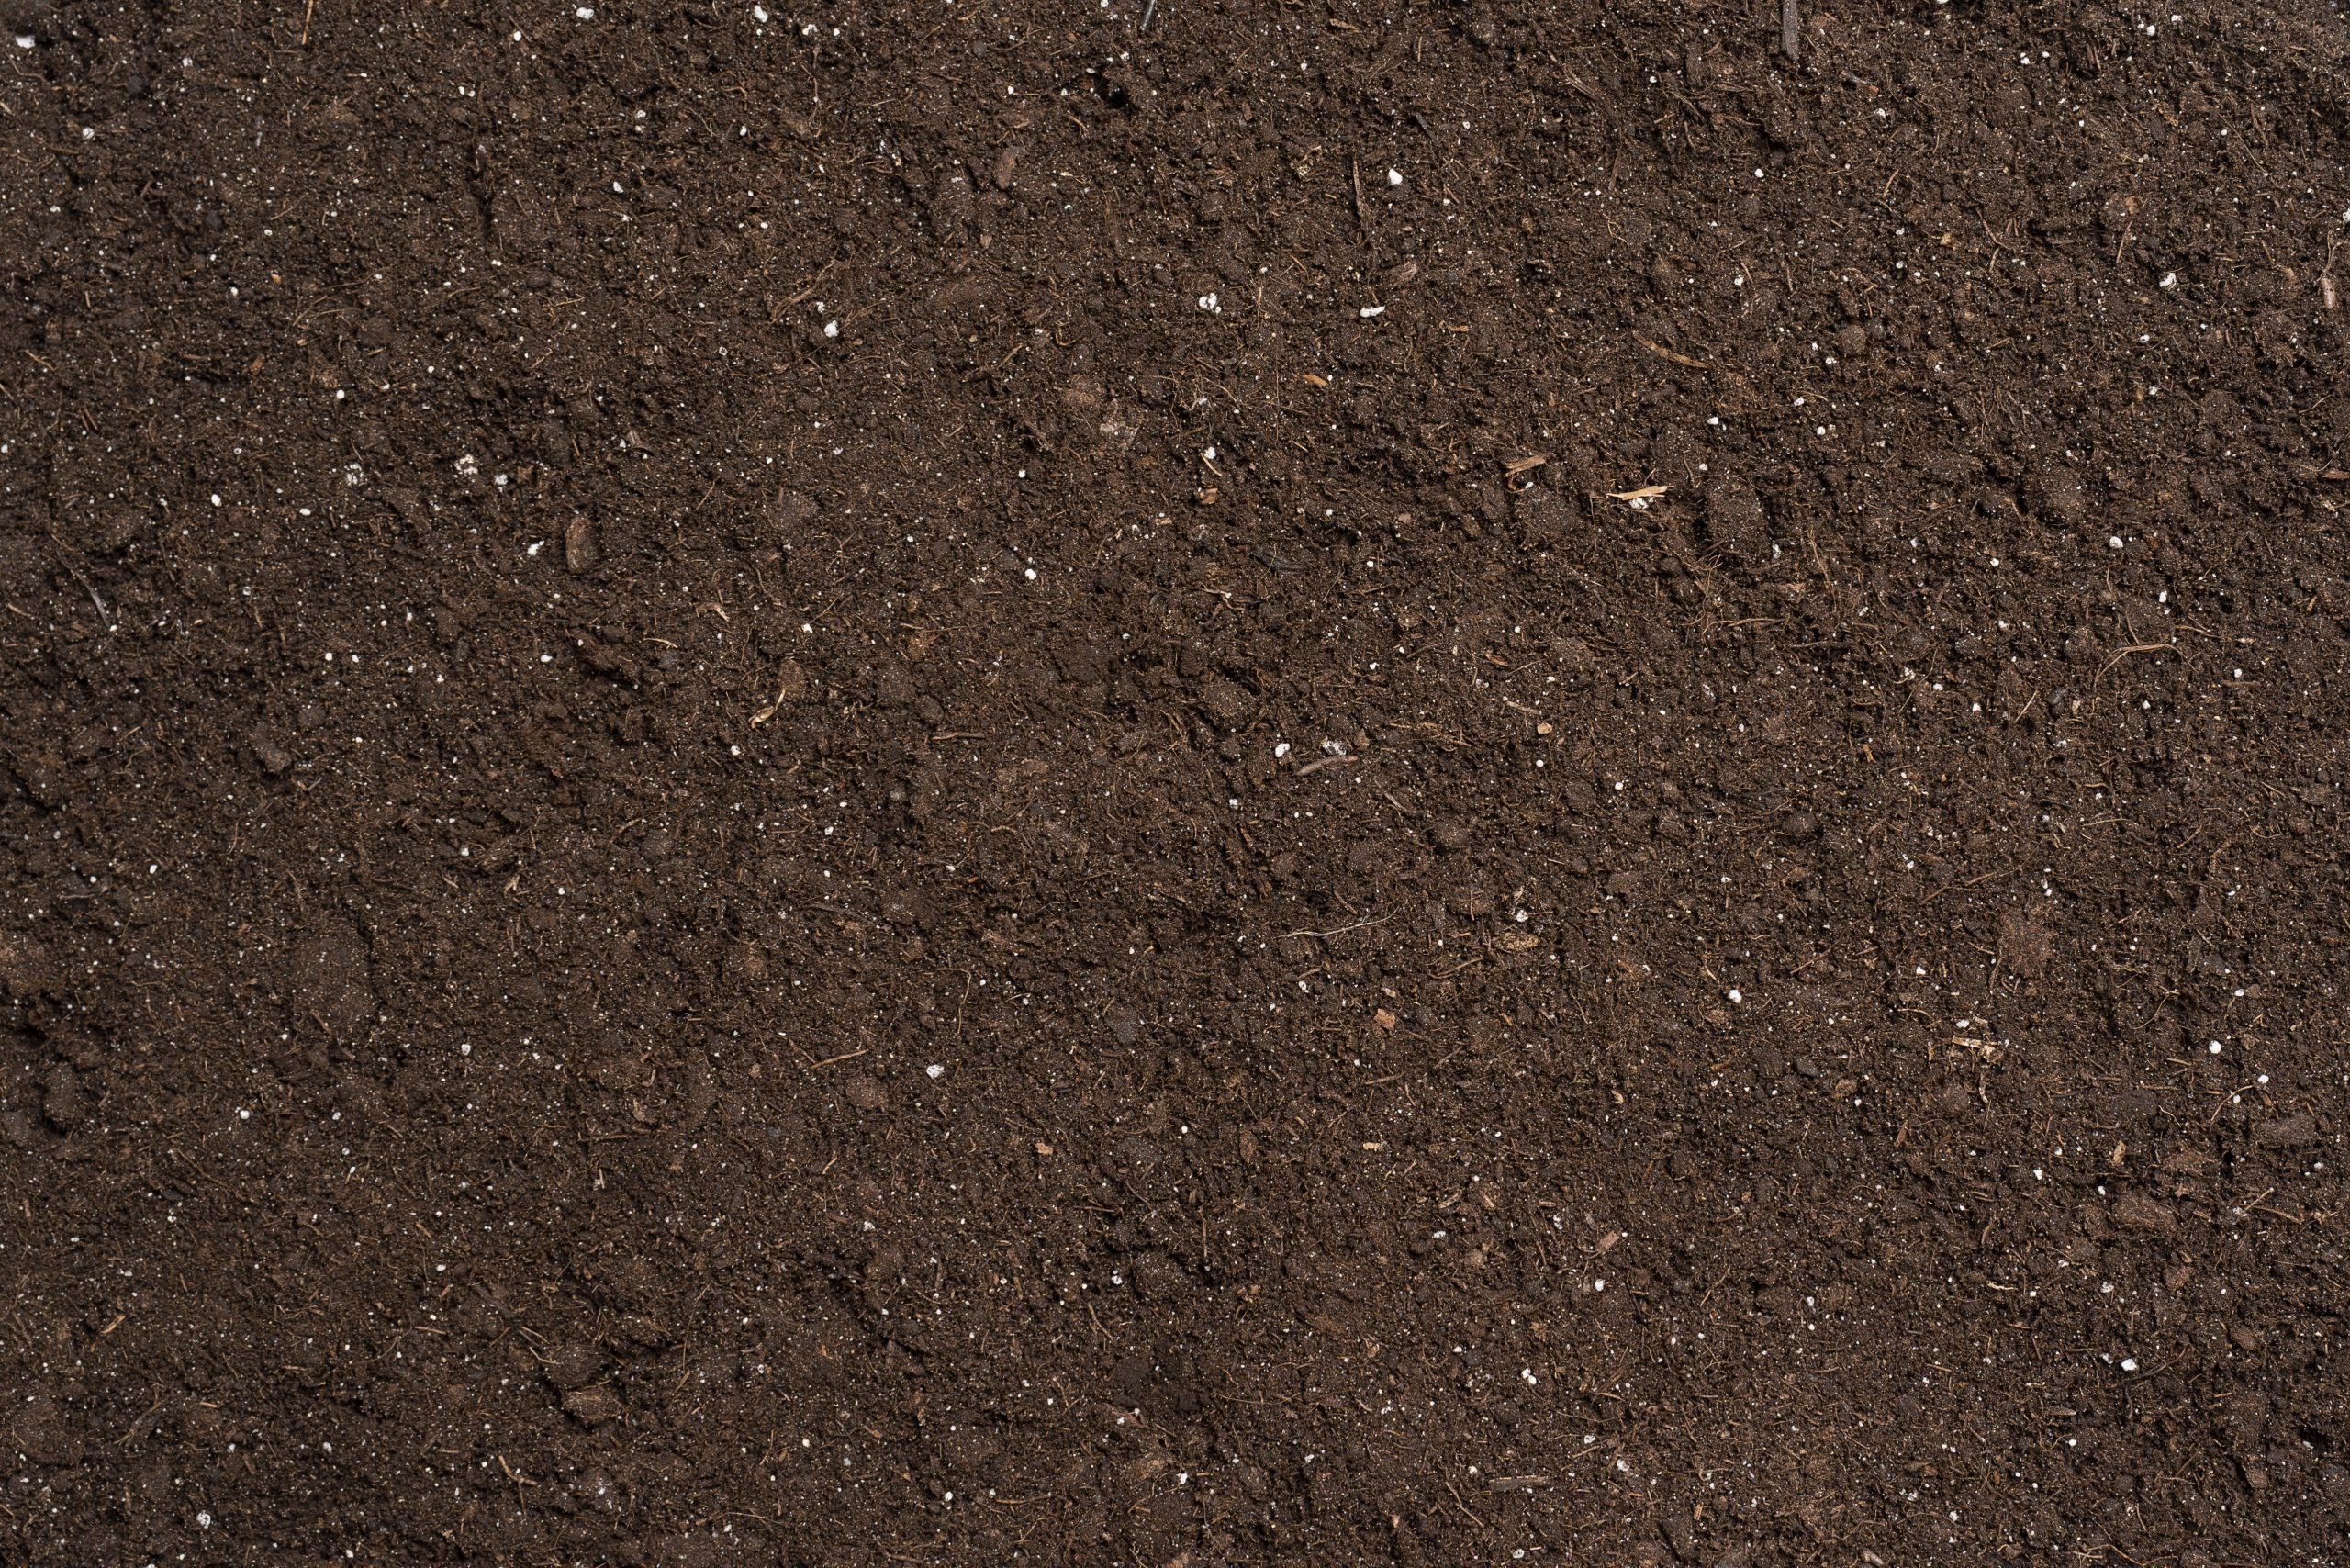 This Is What the Color of Your Garden Soil Means